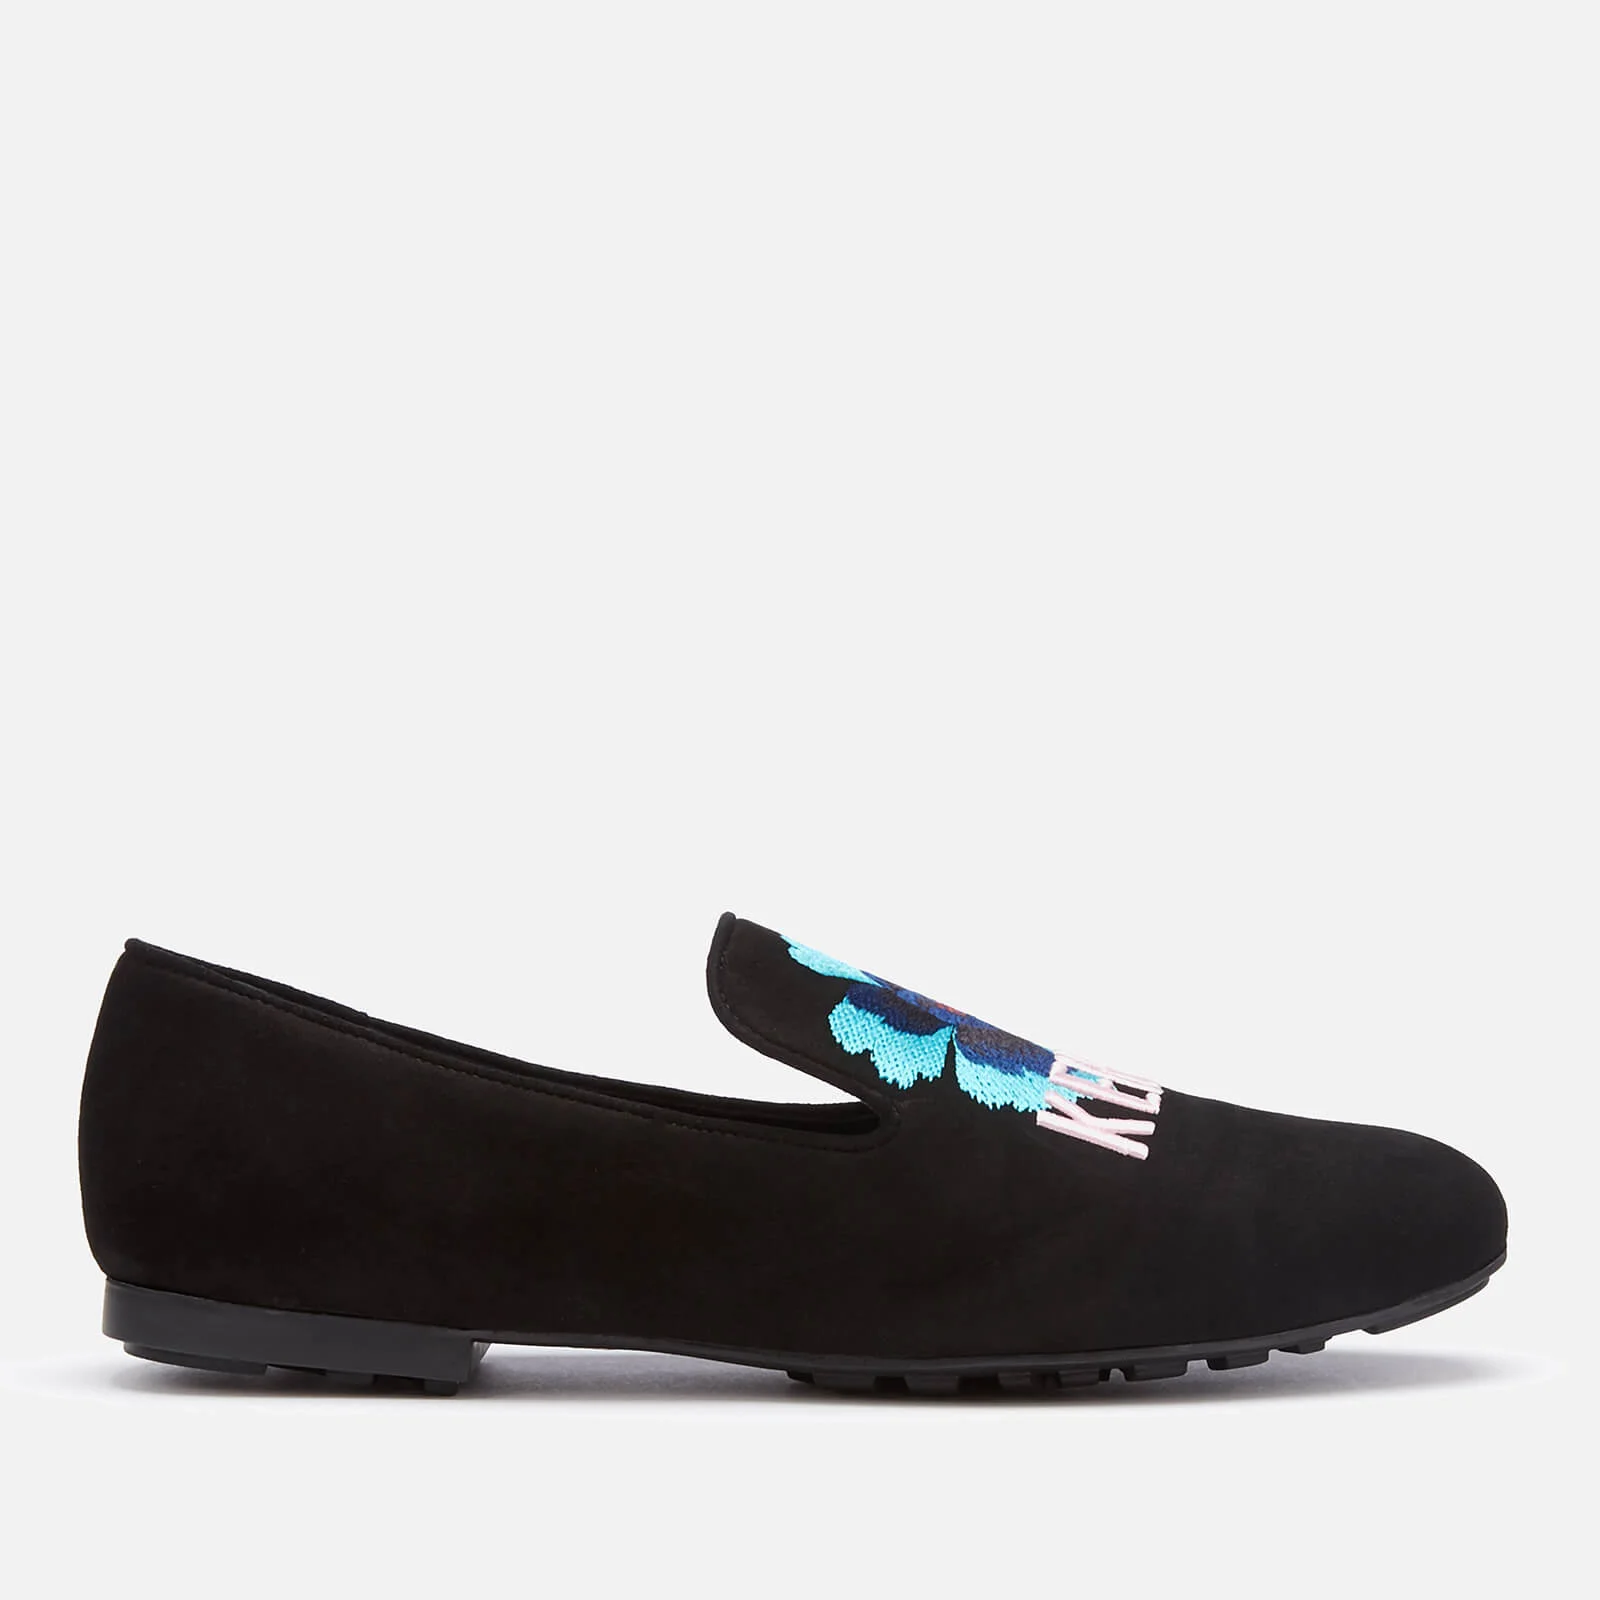 KENZO Women's Custer Embroidered Loafers - Black Image 1